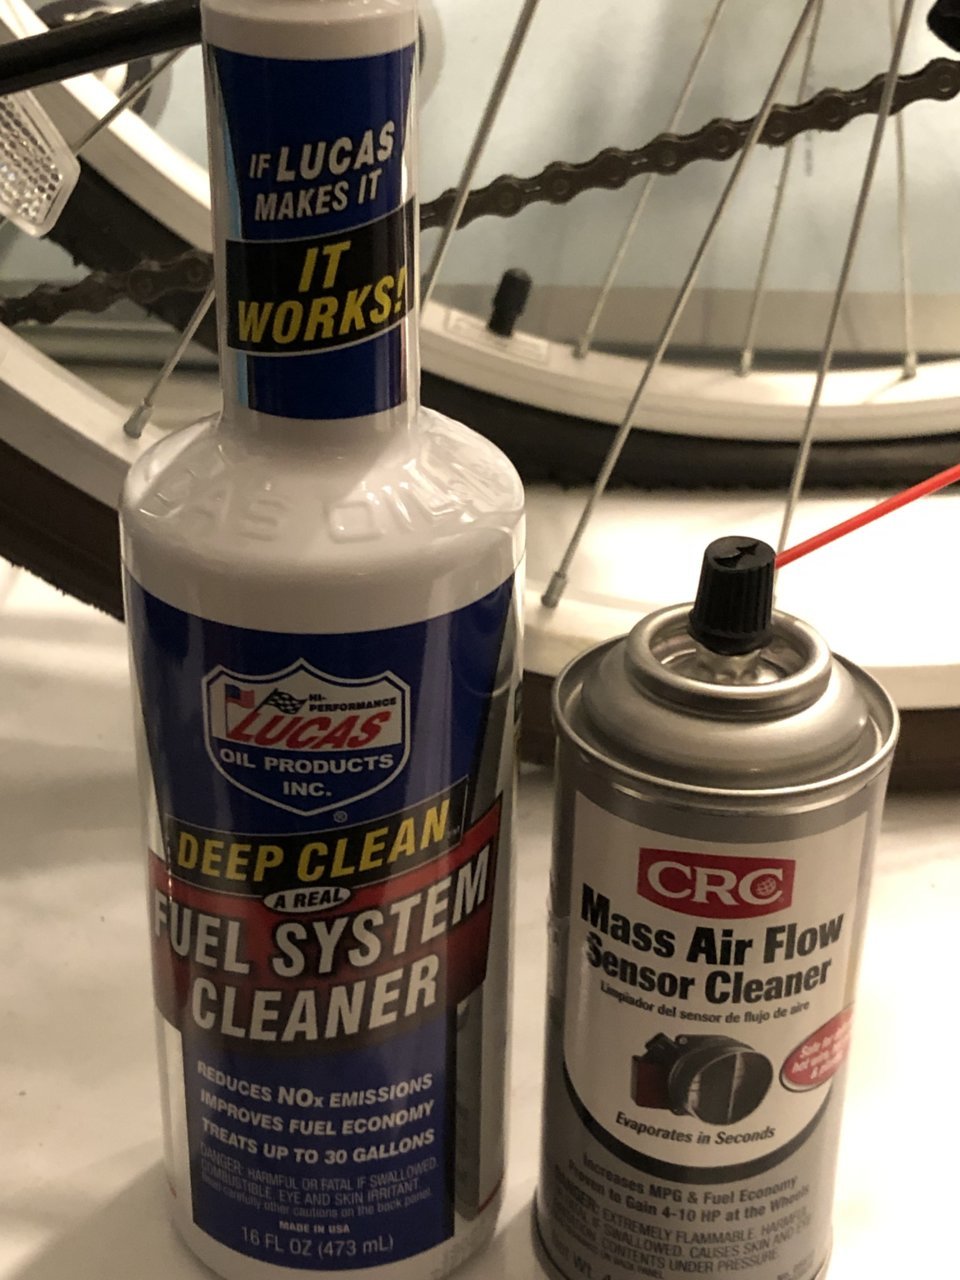 Lucas Deep Clean Review [Fuel System Cleaner for Motorcycles]